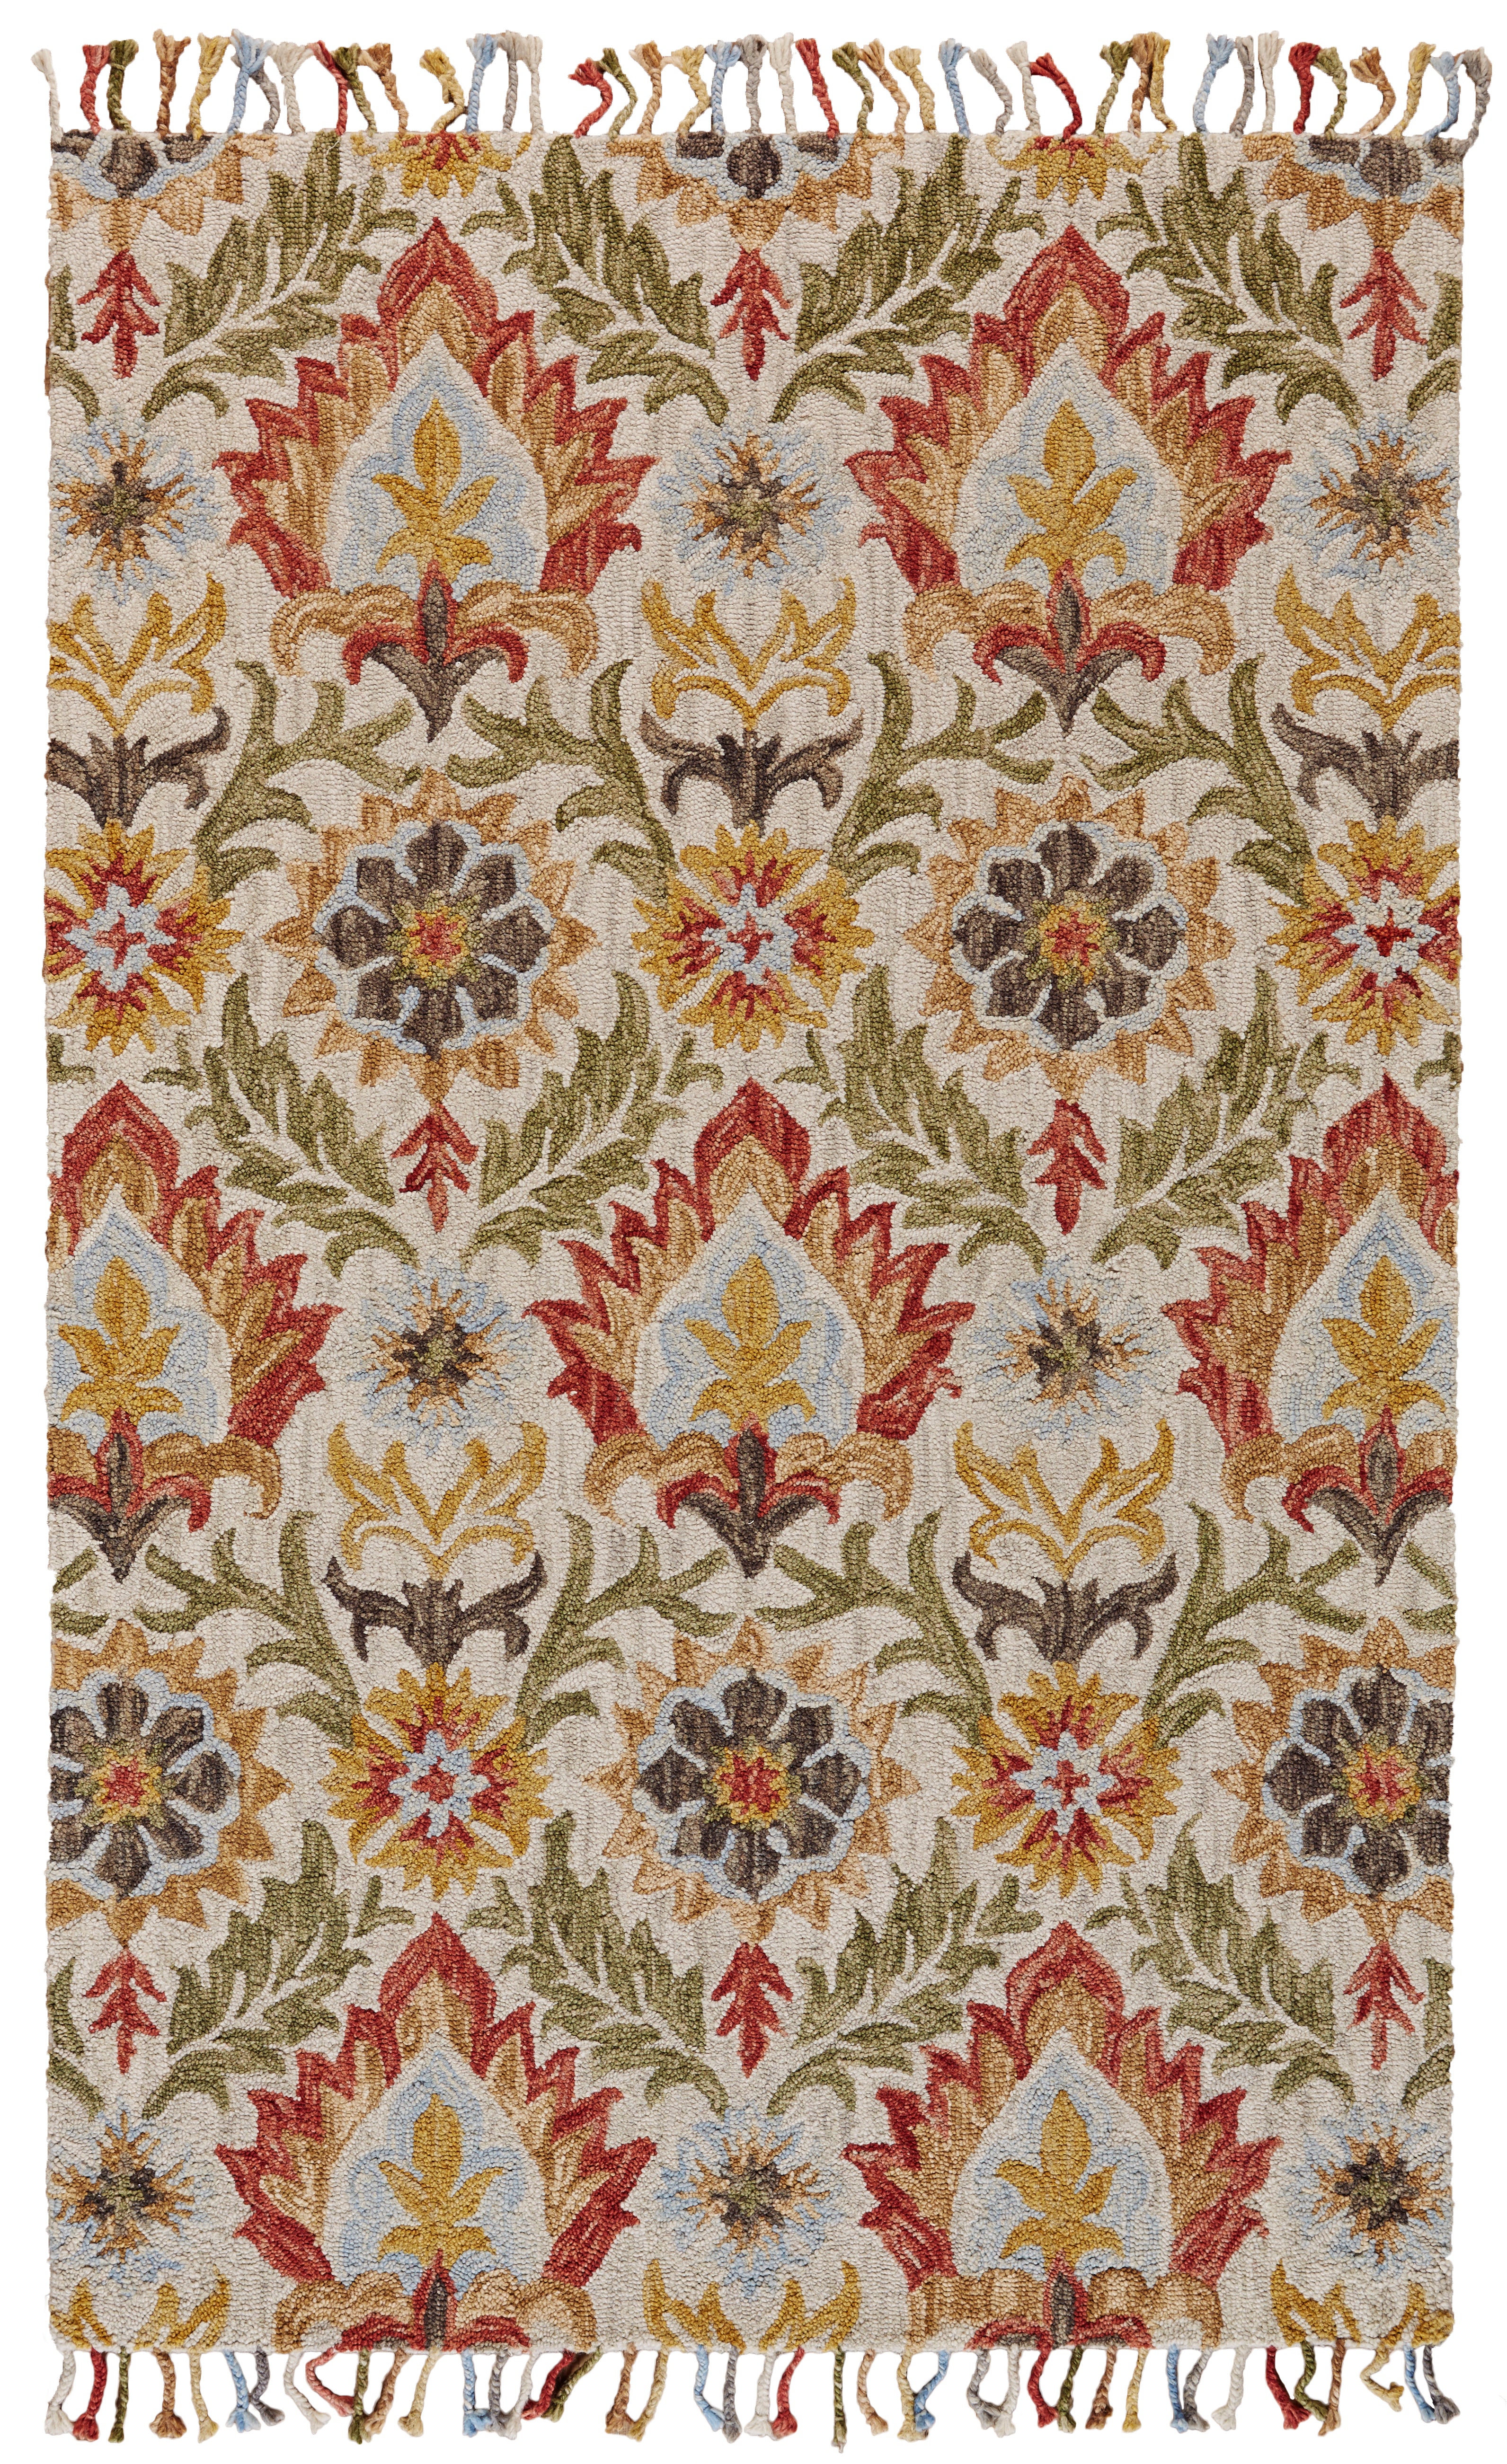 Muted Desert floral vibe in this area rug collection - By What A Room Serving San Mateo, Sunnyvale, Los Gatos, Pleasanton and the Greater San Jose area